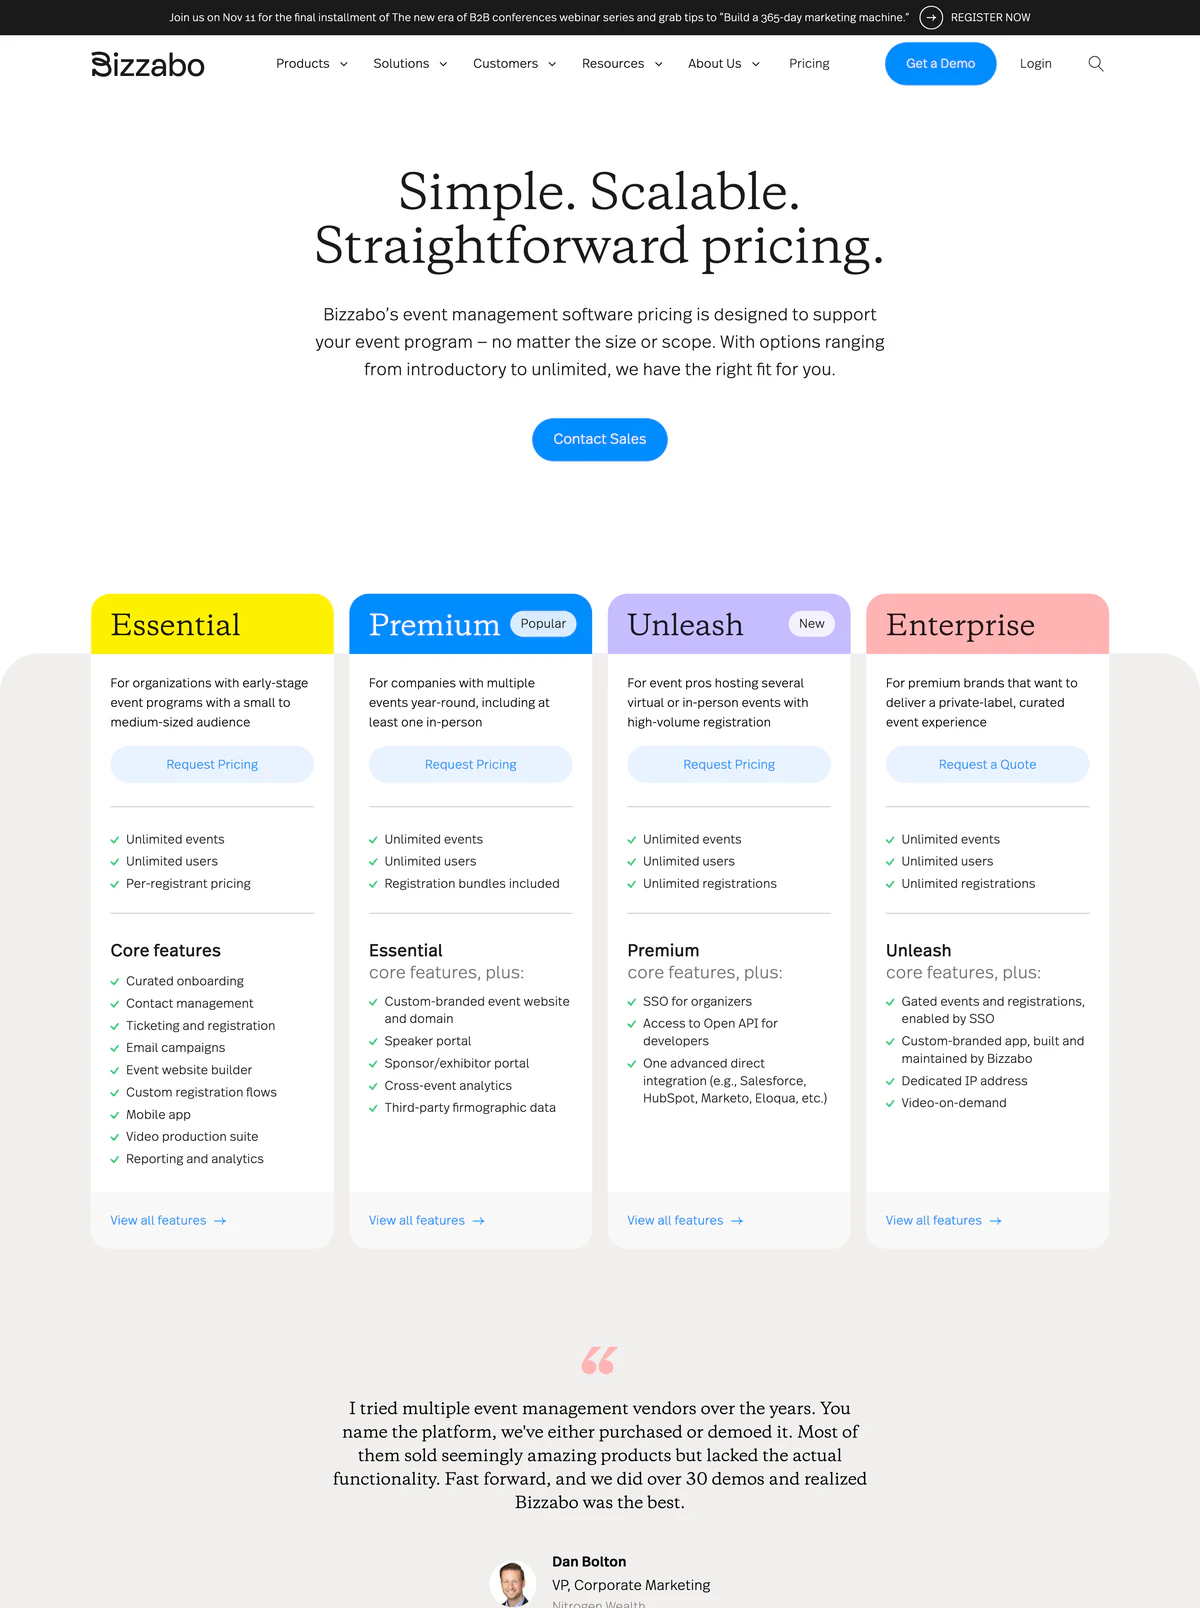 Pricing Page Example Bizzabo